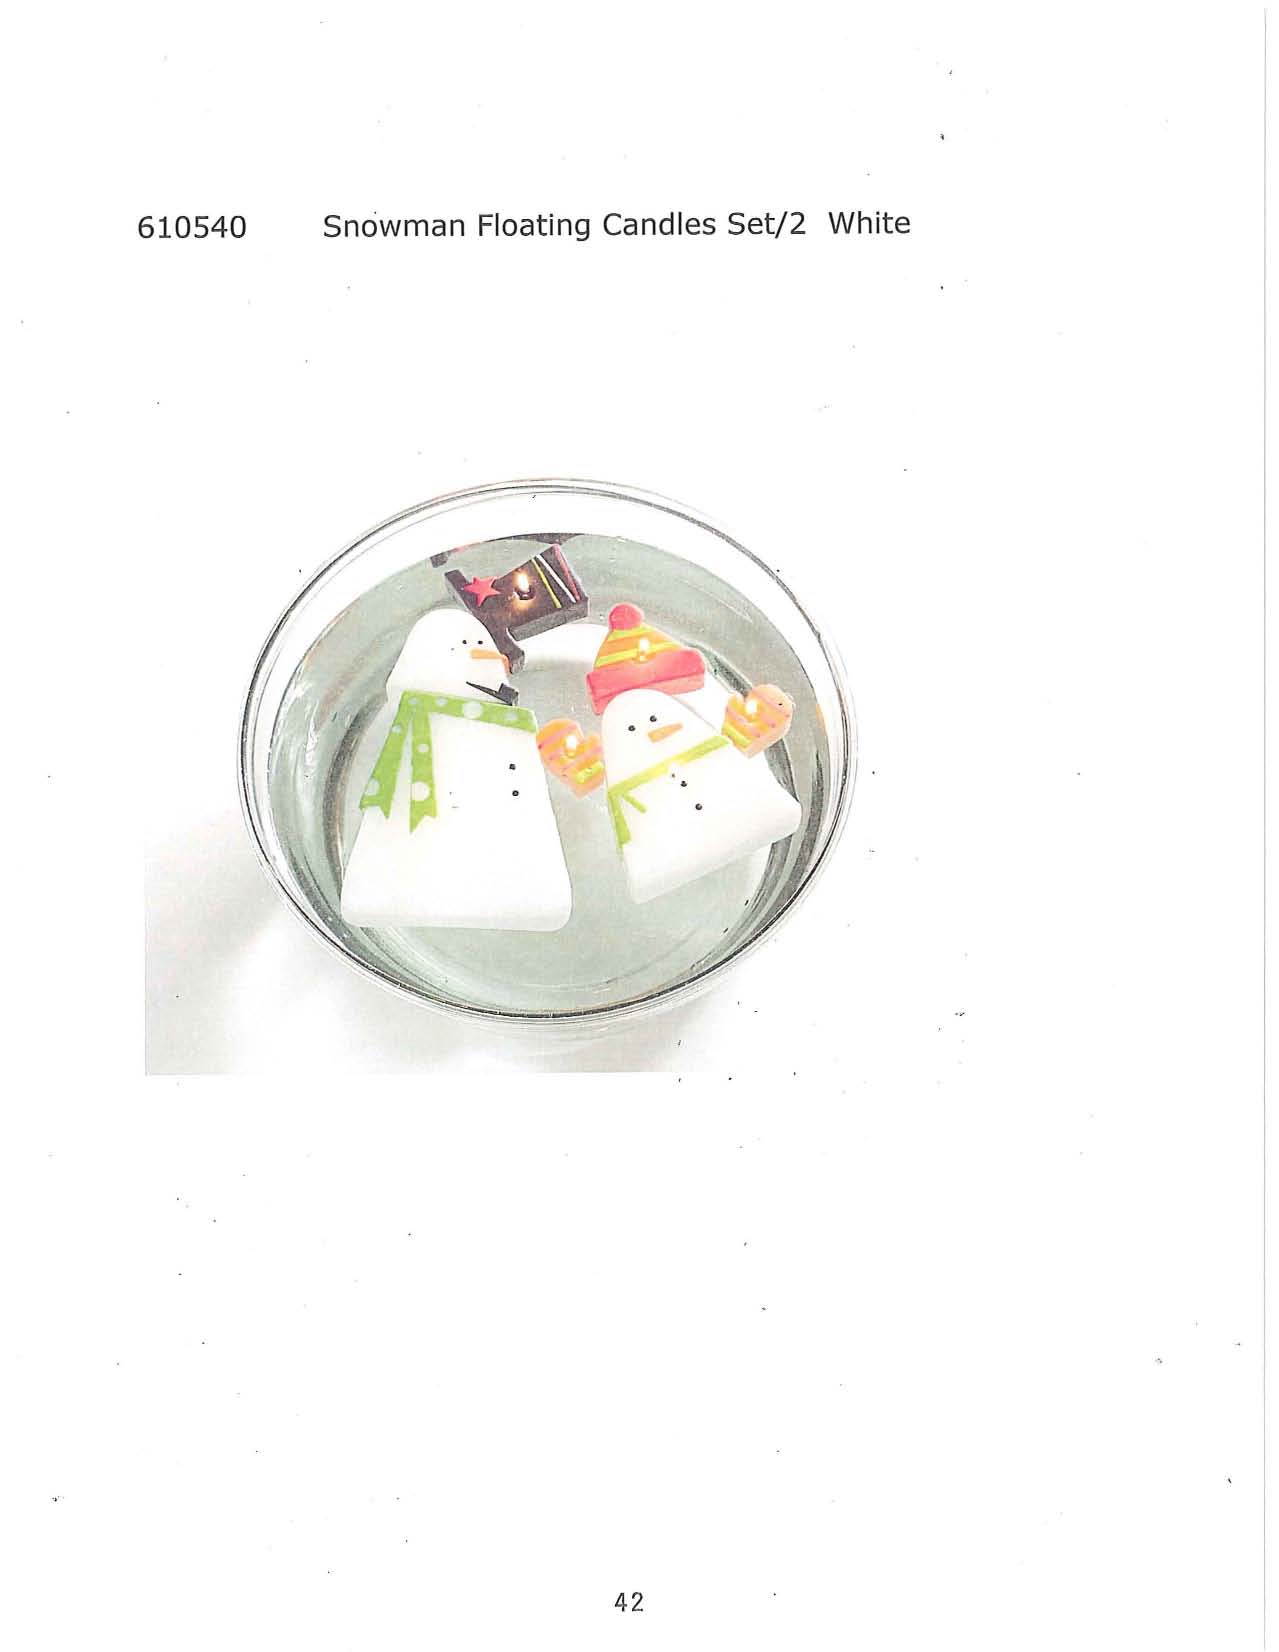 Snowman Floating Candle set/2 - White